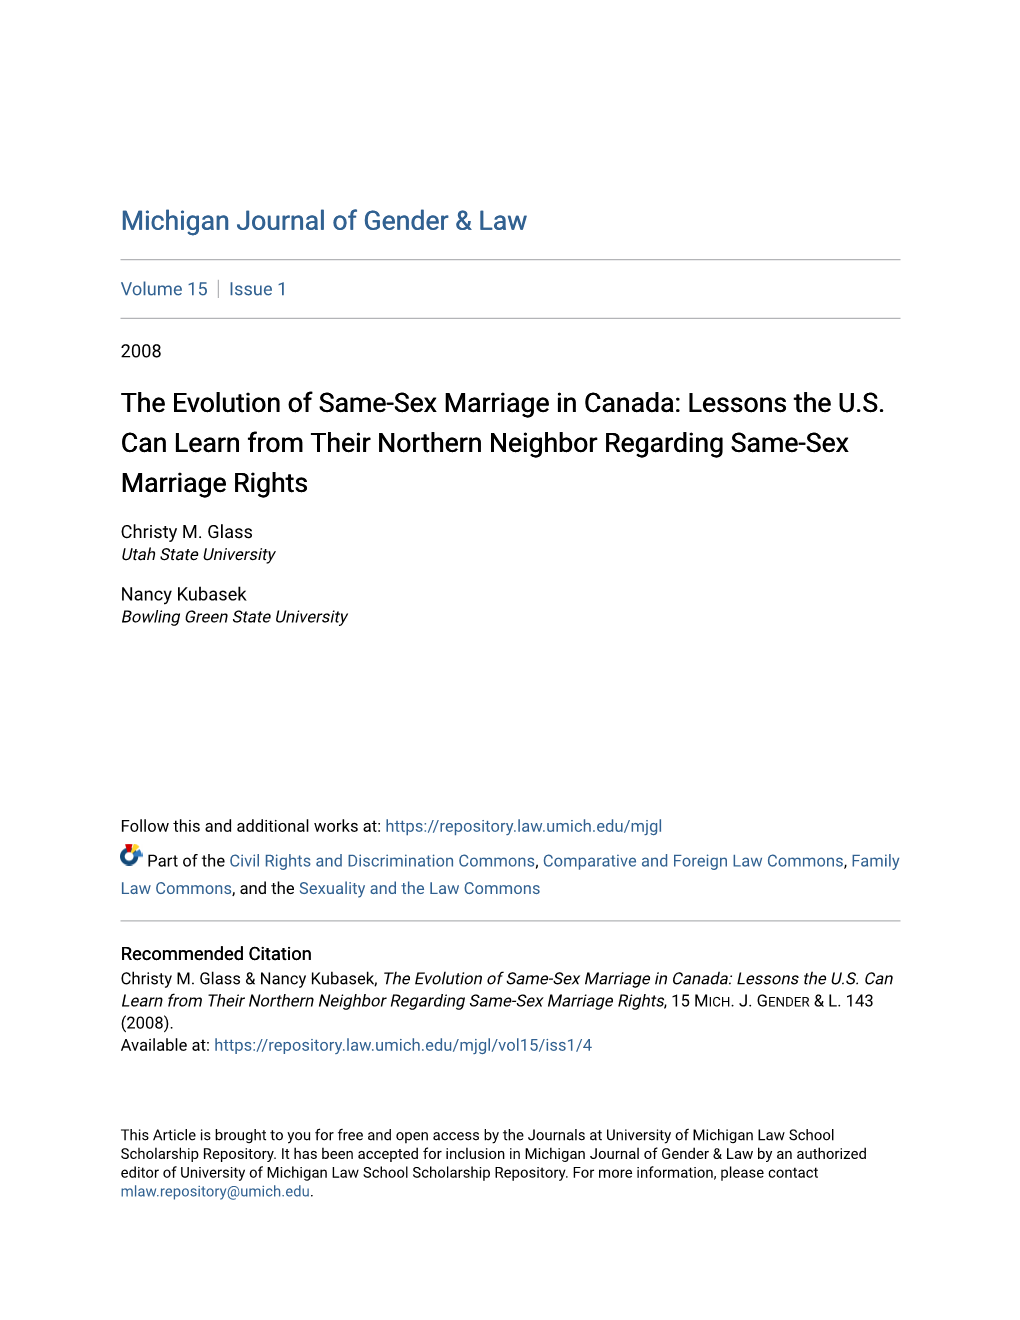 The Evolution of Same-Sex Marriage in Canada: Lessons the U.S